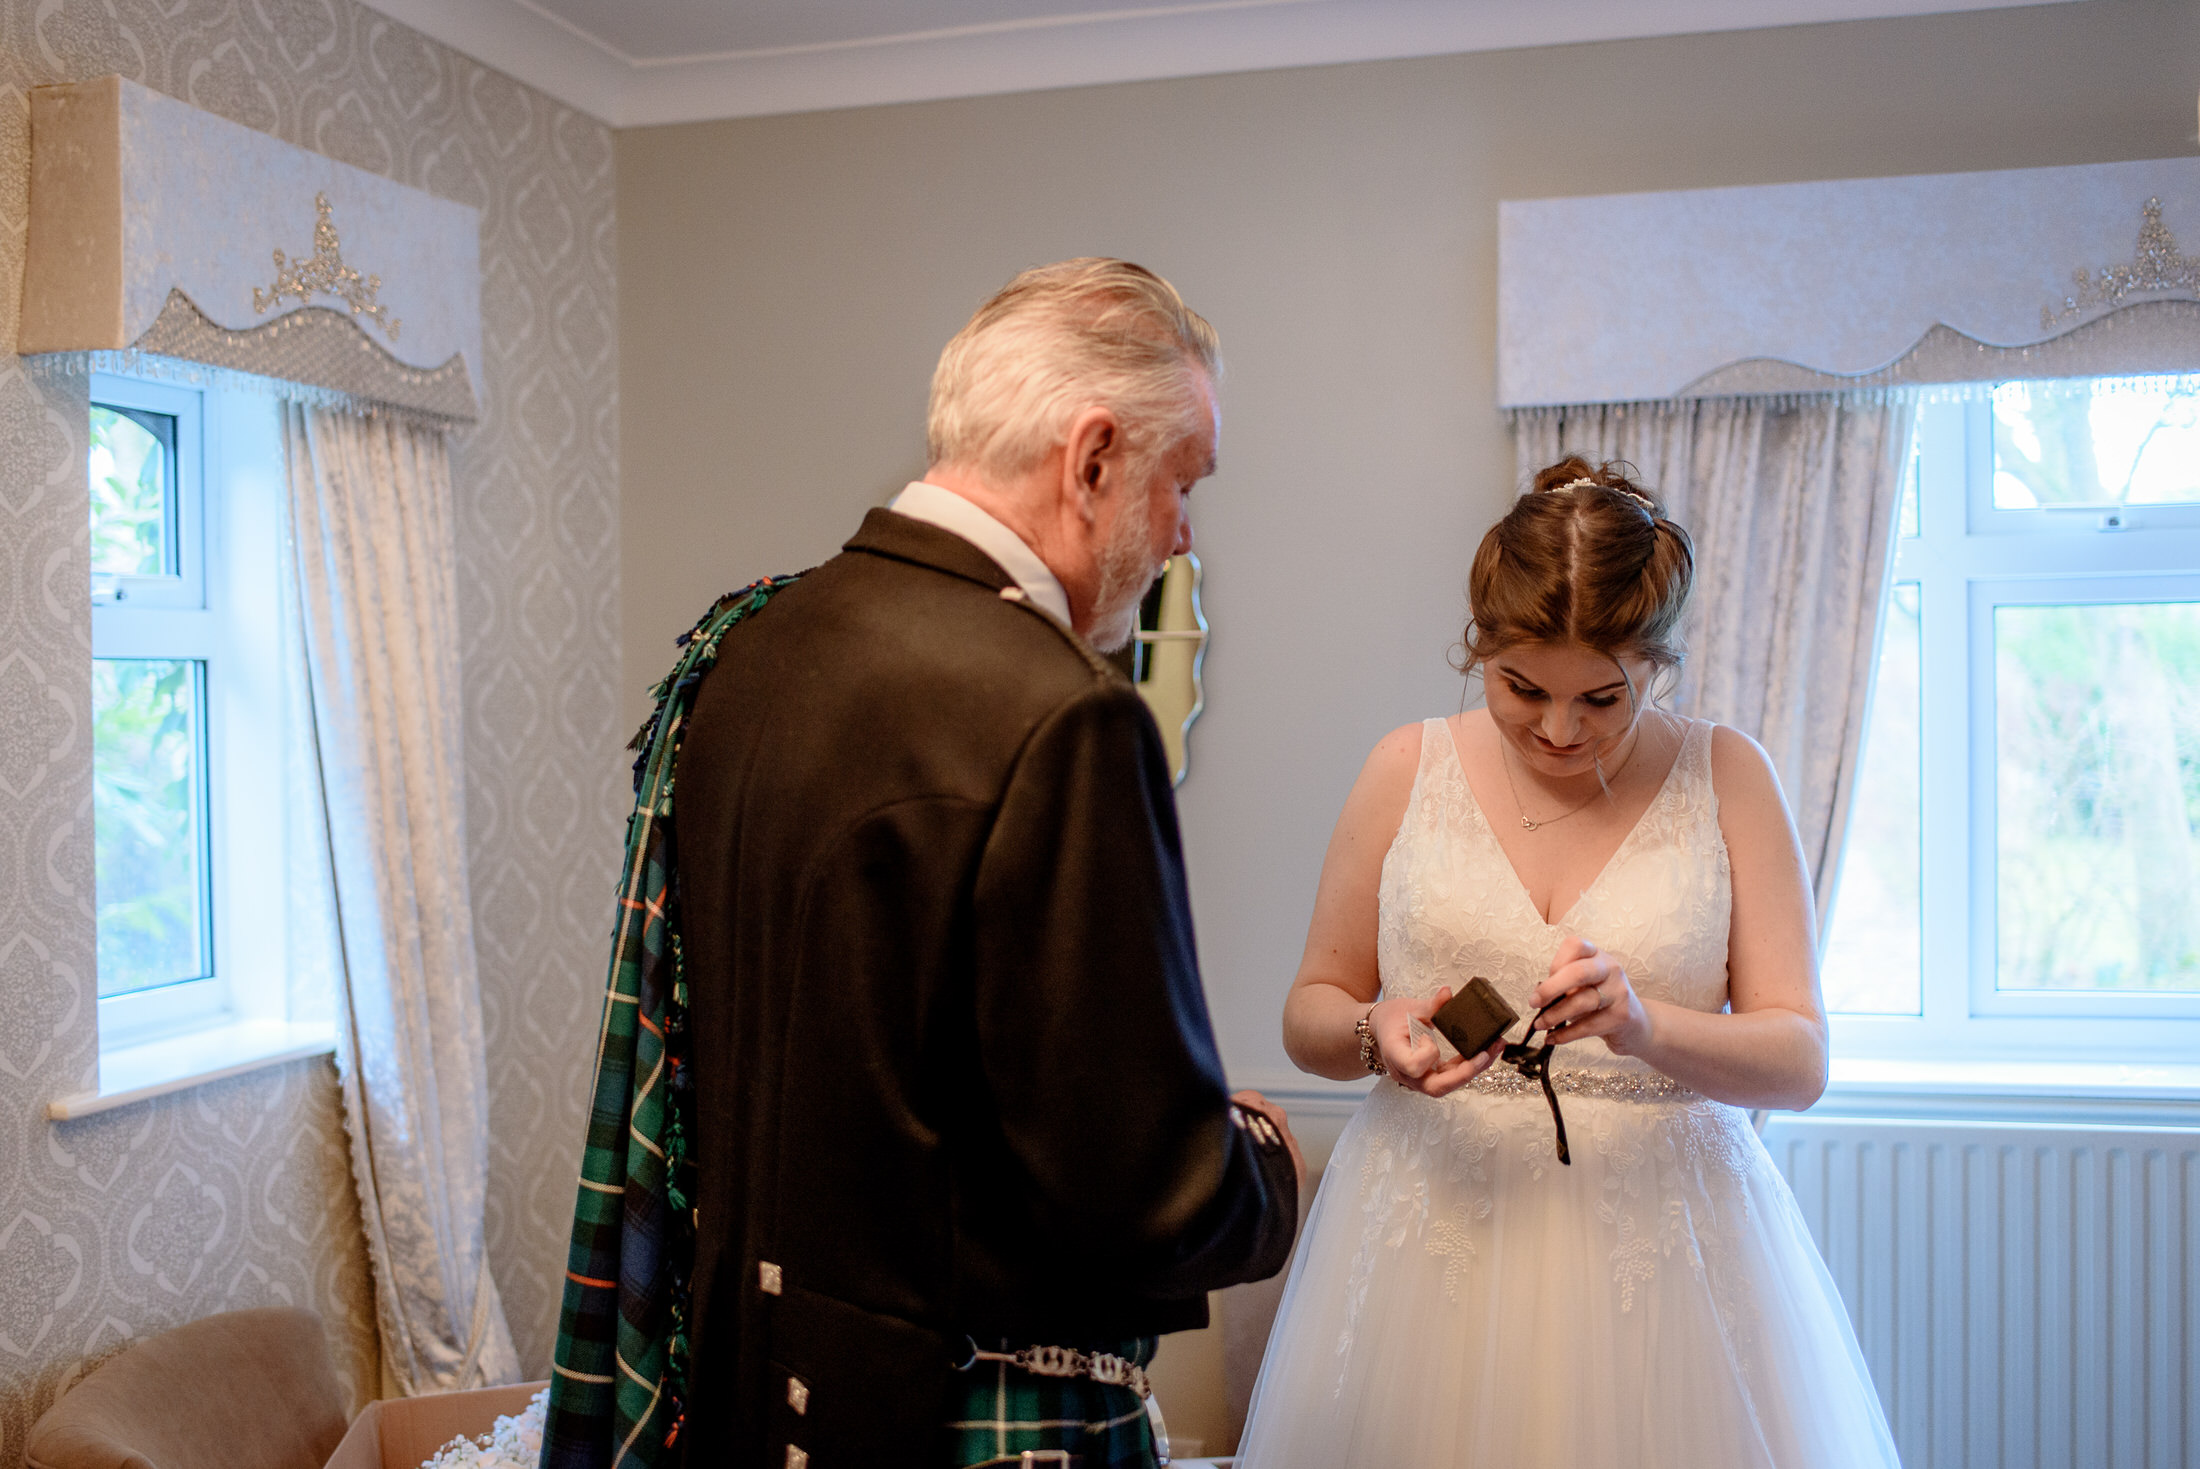 A man at the Brackenborough Hotel is helping a woman put on her wedding dress.